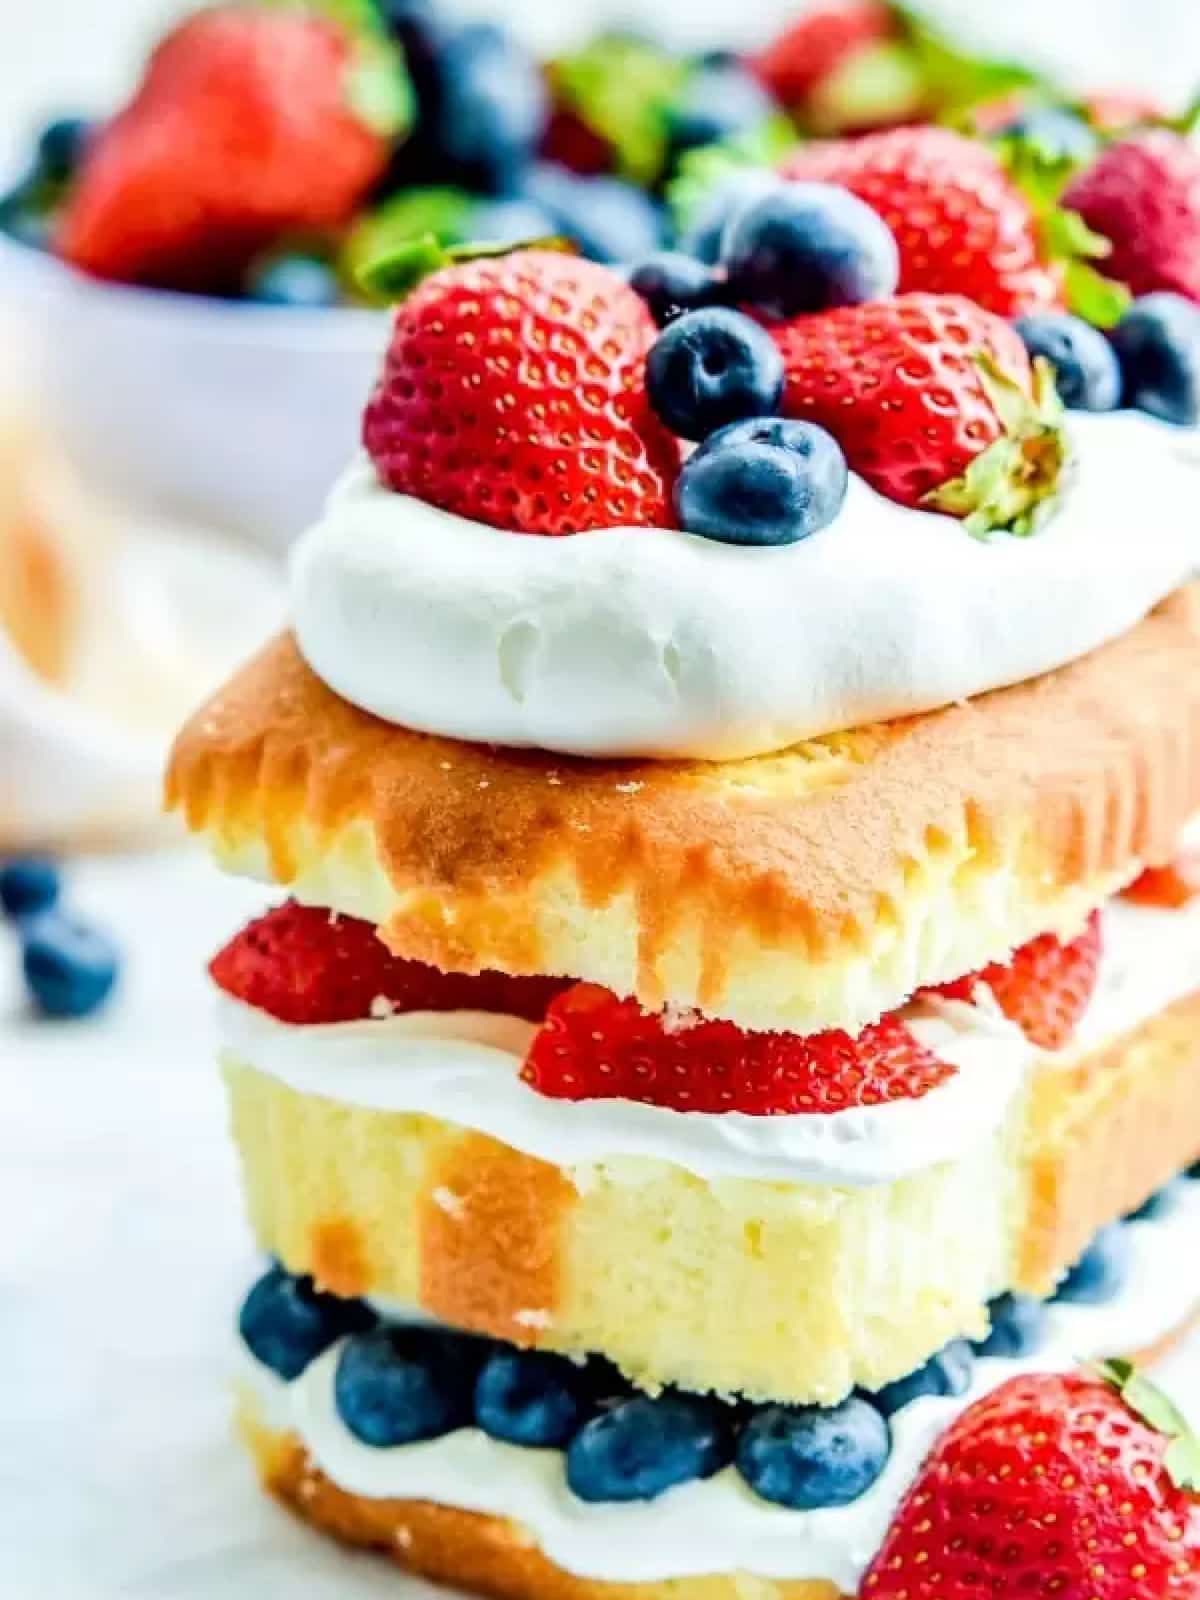 A layered pound cake with whip cream in between the layers and strawberries and blueberries on top.